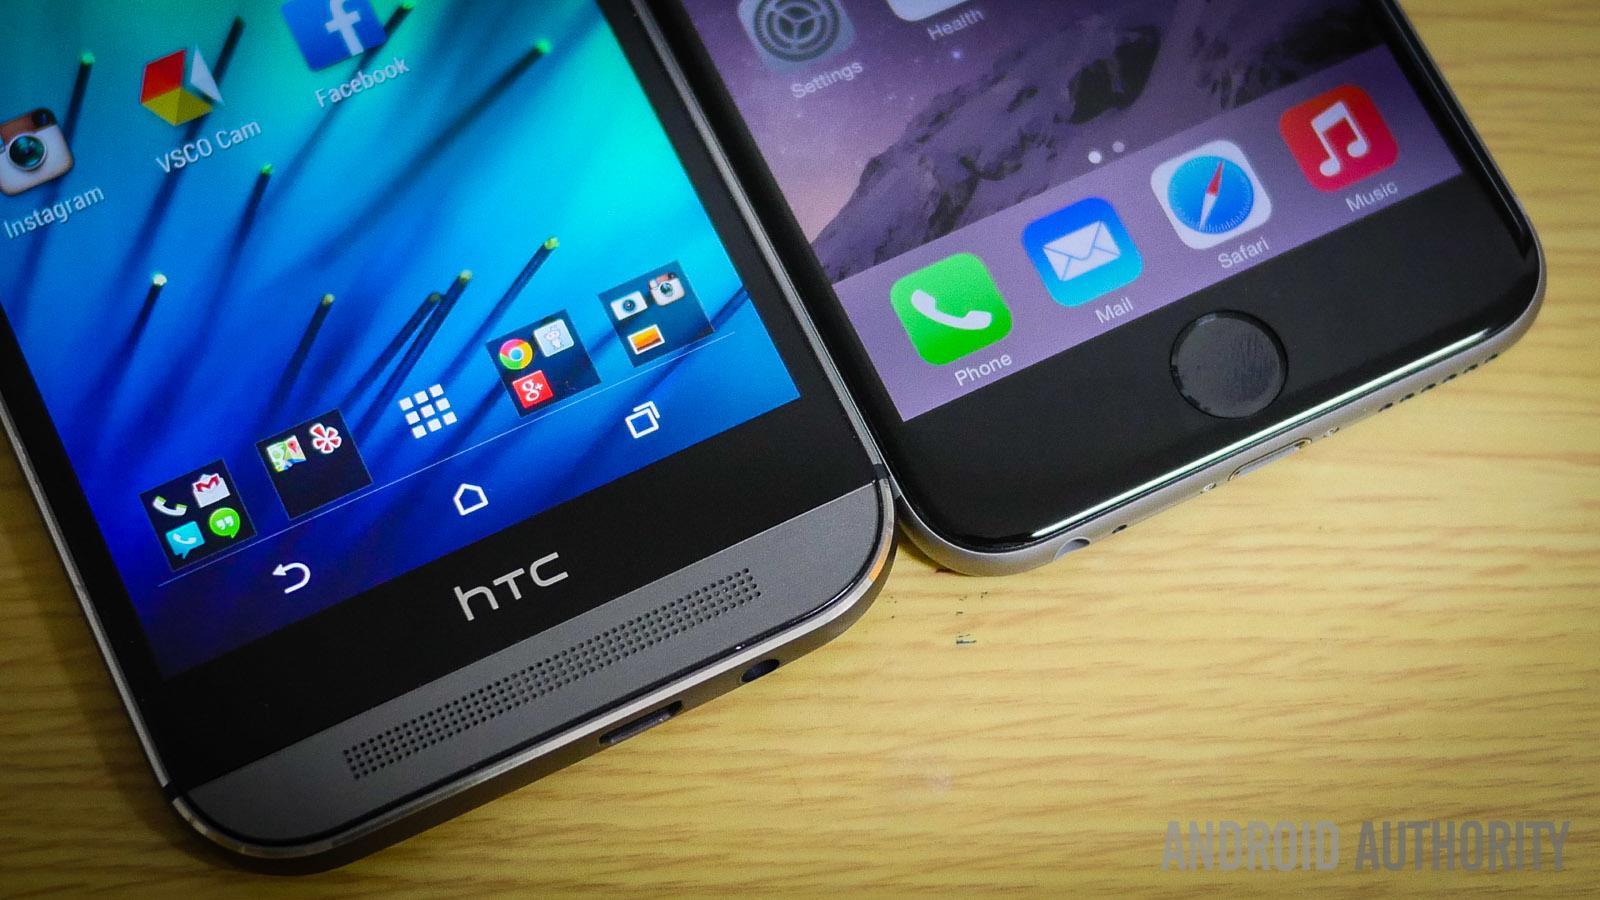 iphone 6 plus vs htc one m8 quick look aa (2 of 14)